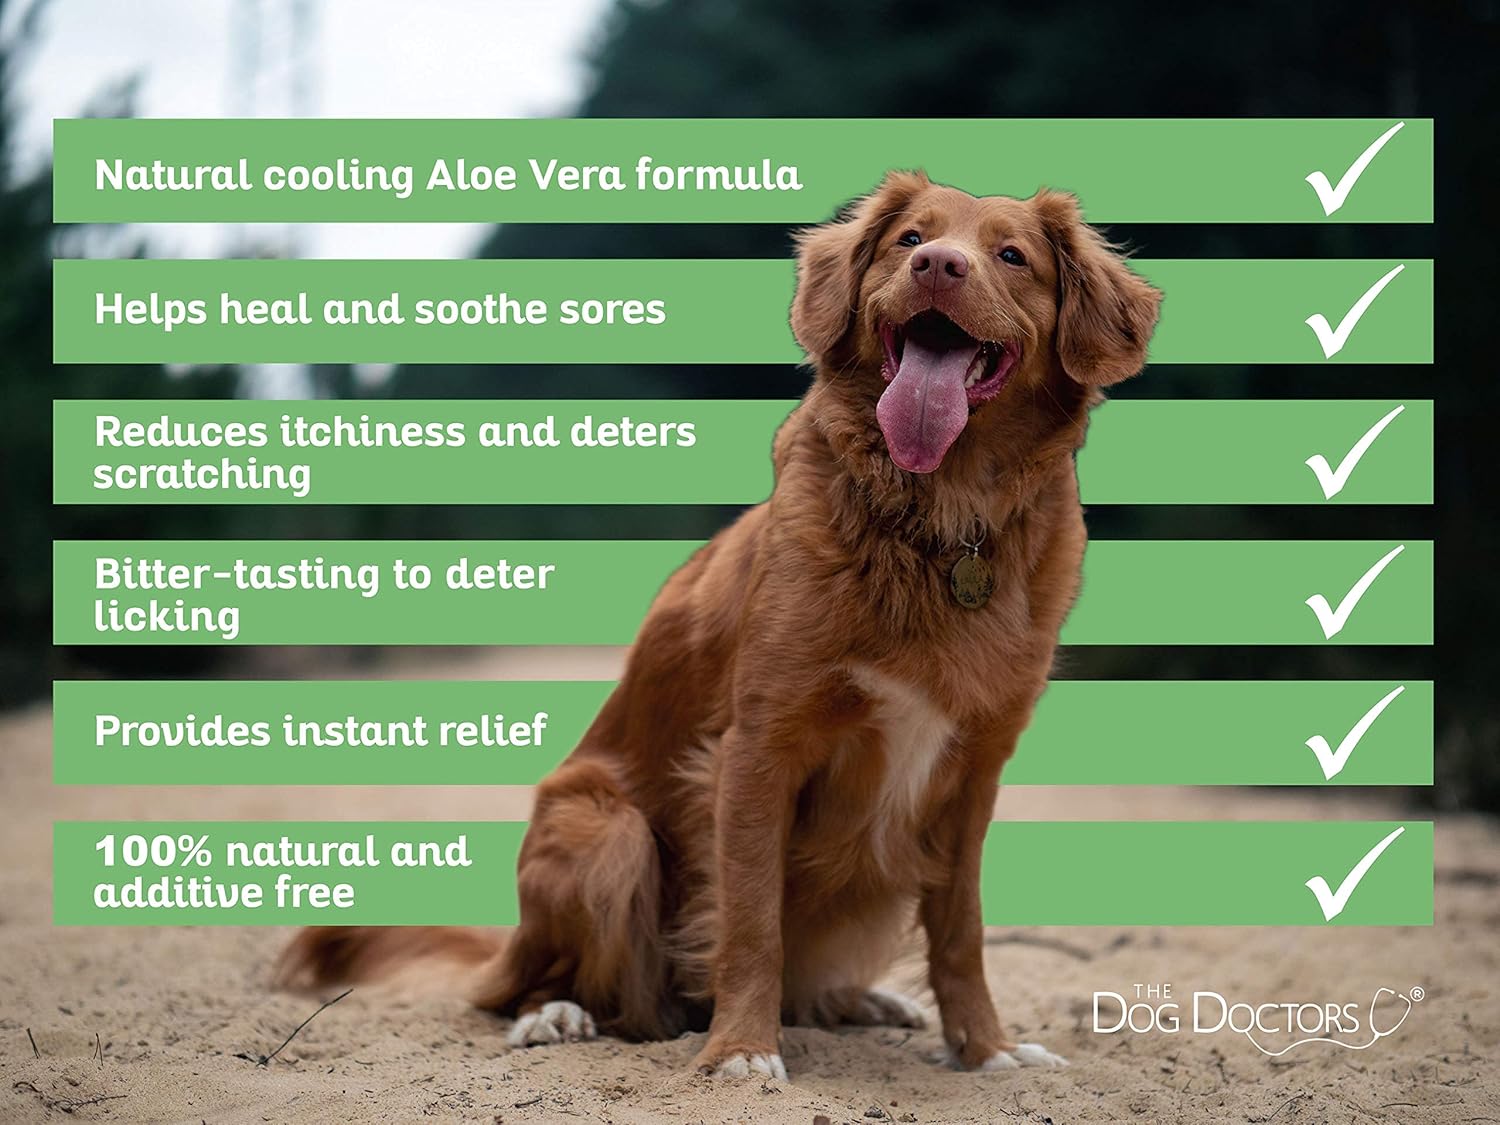 The Dog Doctors Aloe Vera Hot Spot Foam Helps Heals and Soothes Sores Whilst Providing Itchy Irritated Skin With Relief. :Pet Supplies